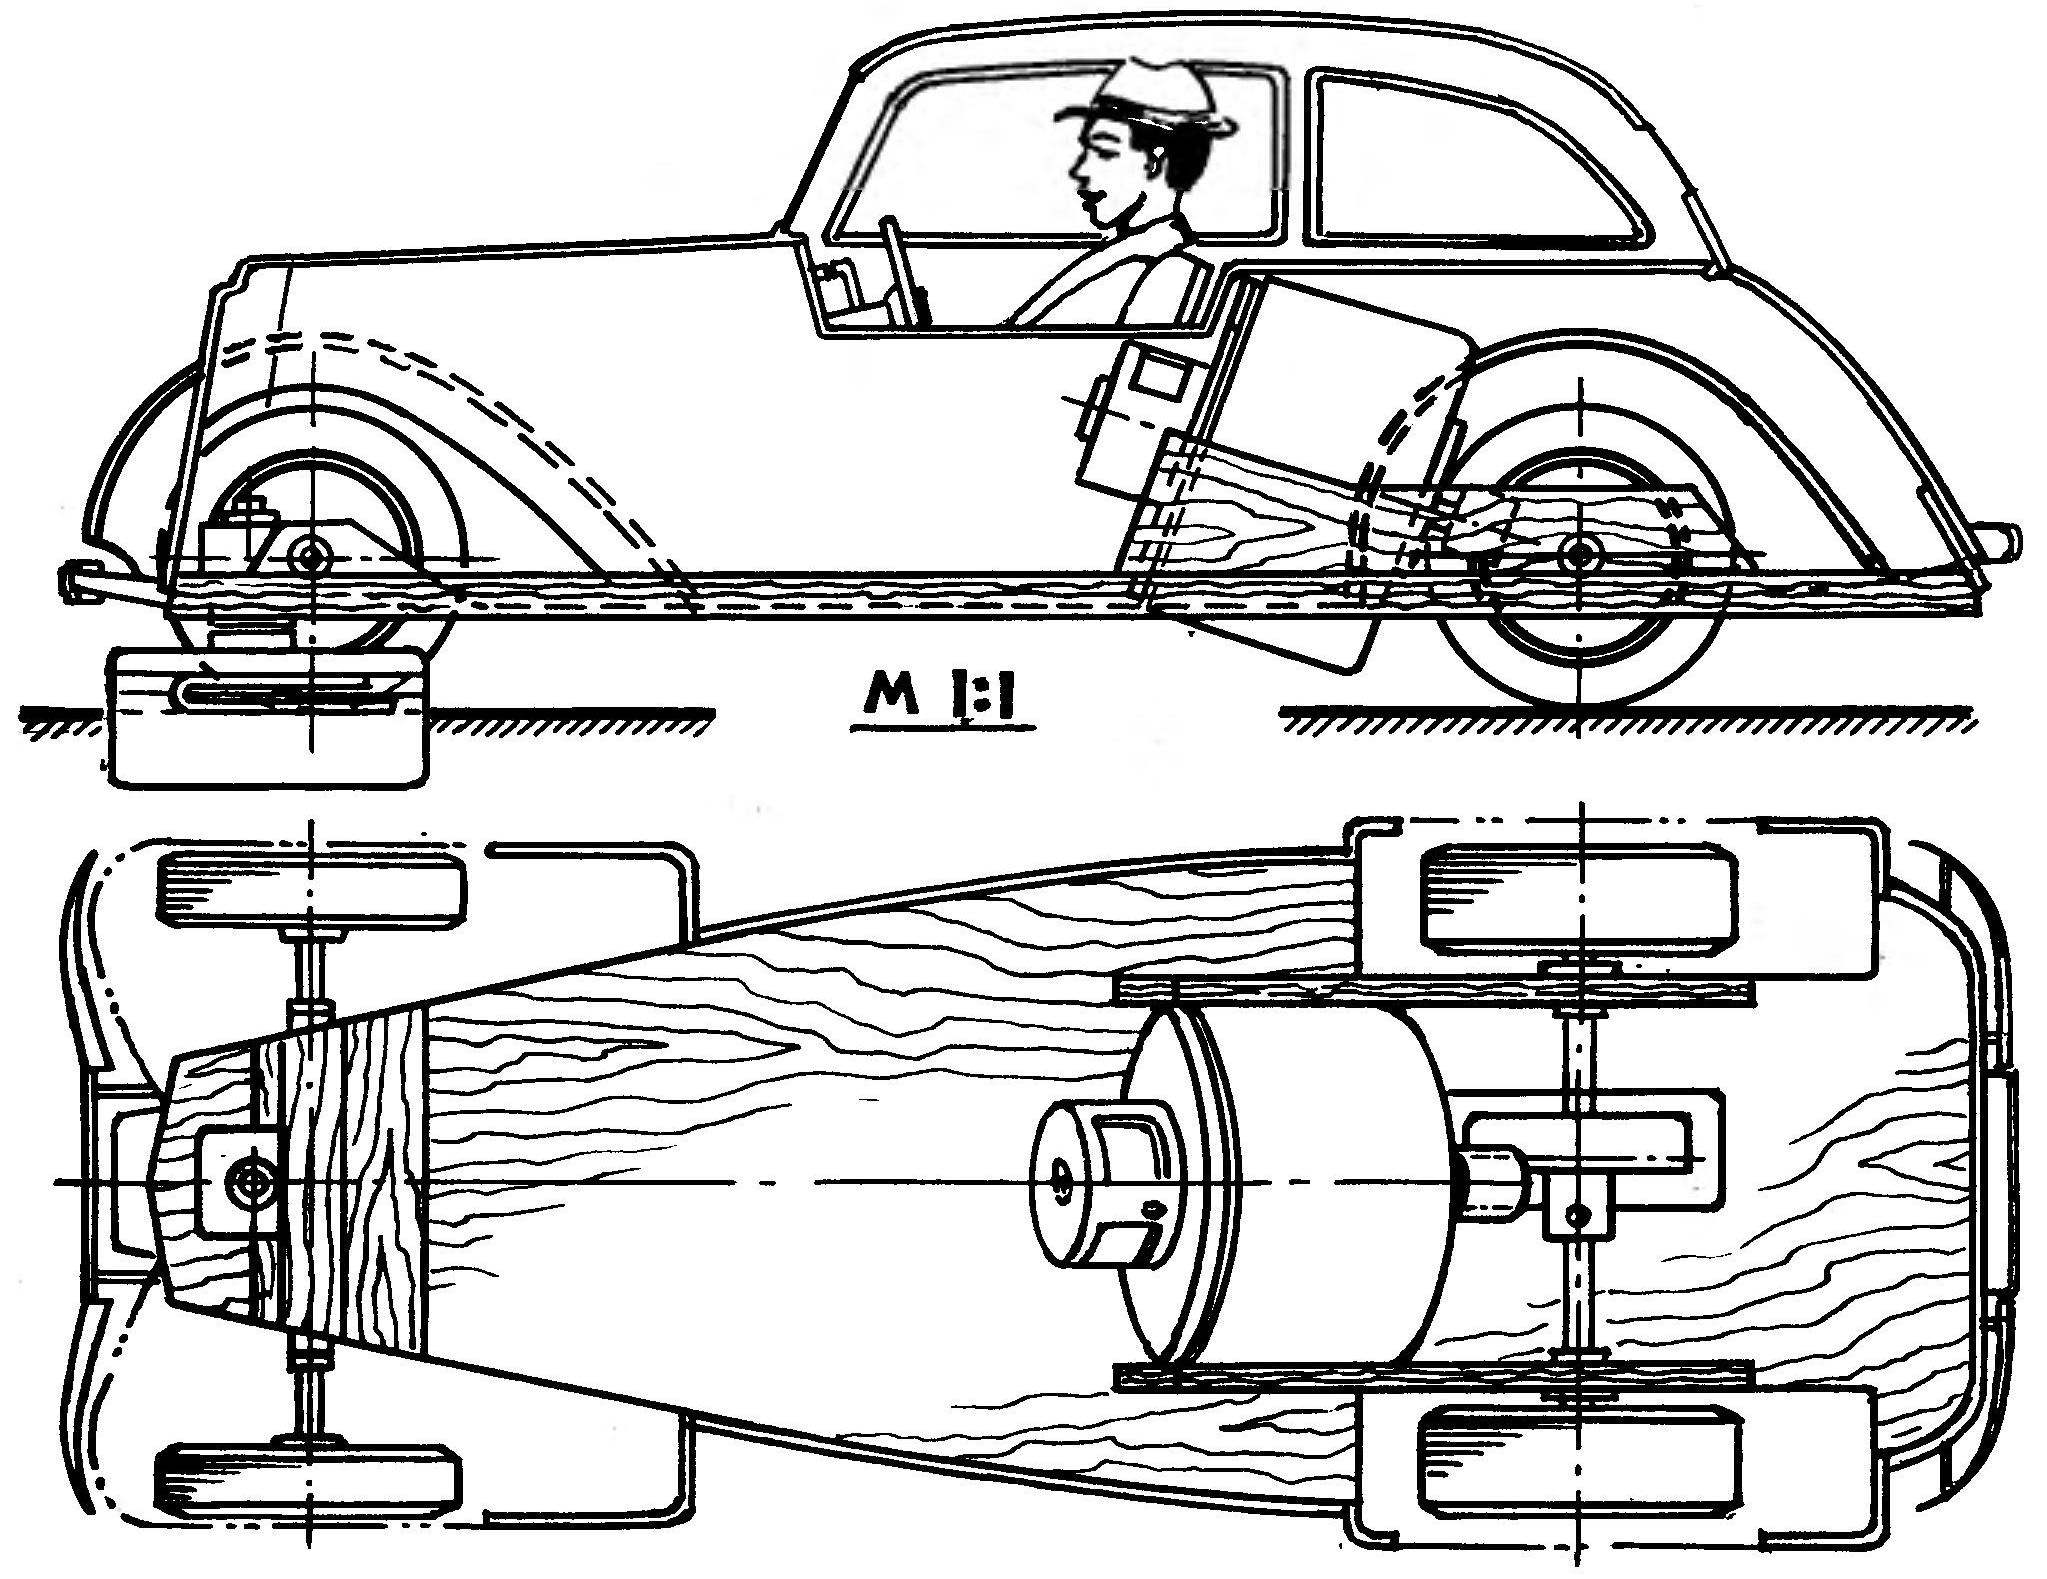 Trace the car-a copy of a power system based on the production motor brand MP-2-007